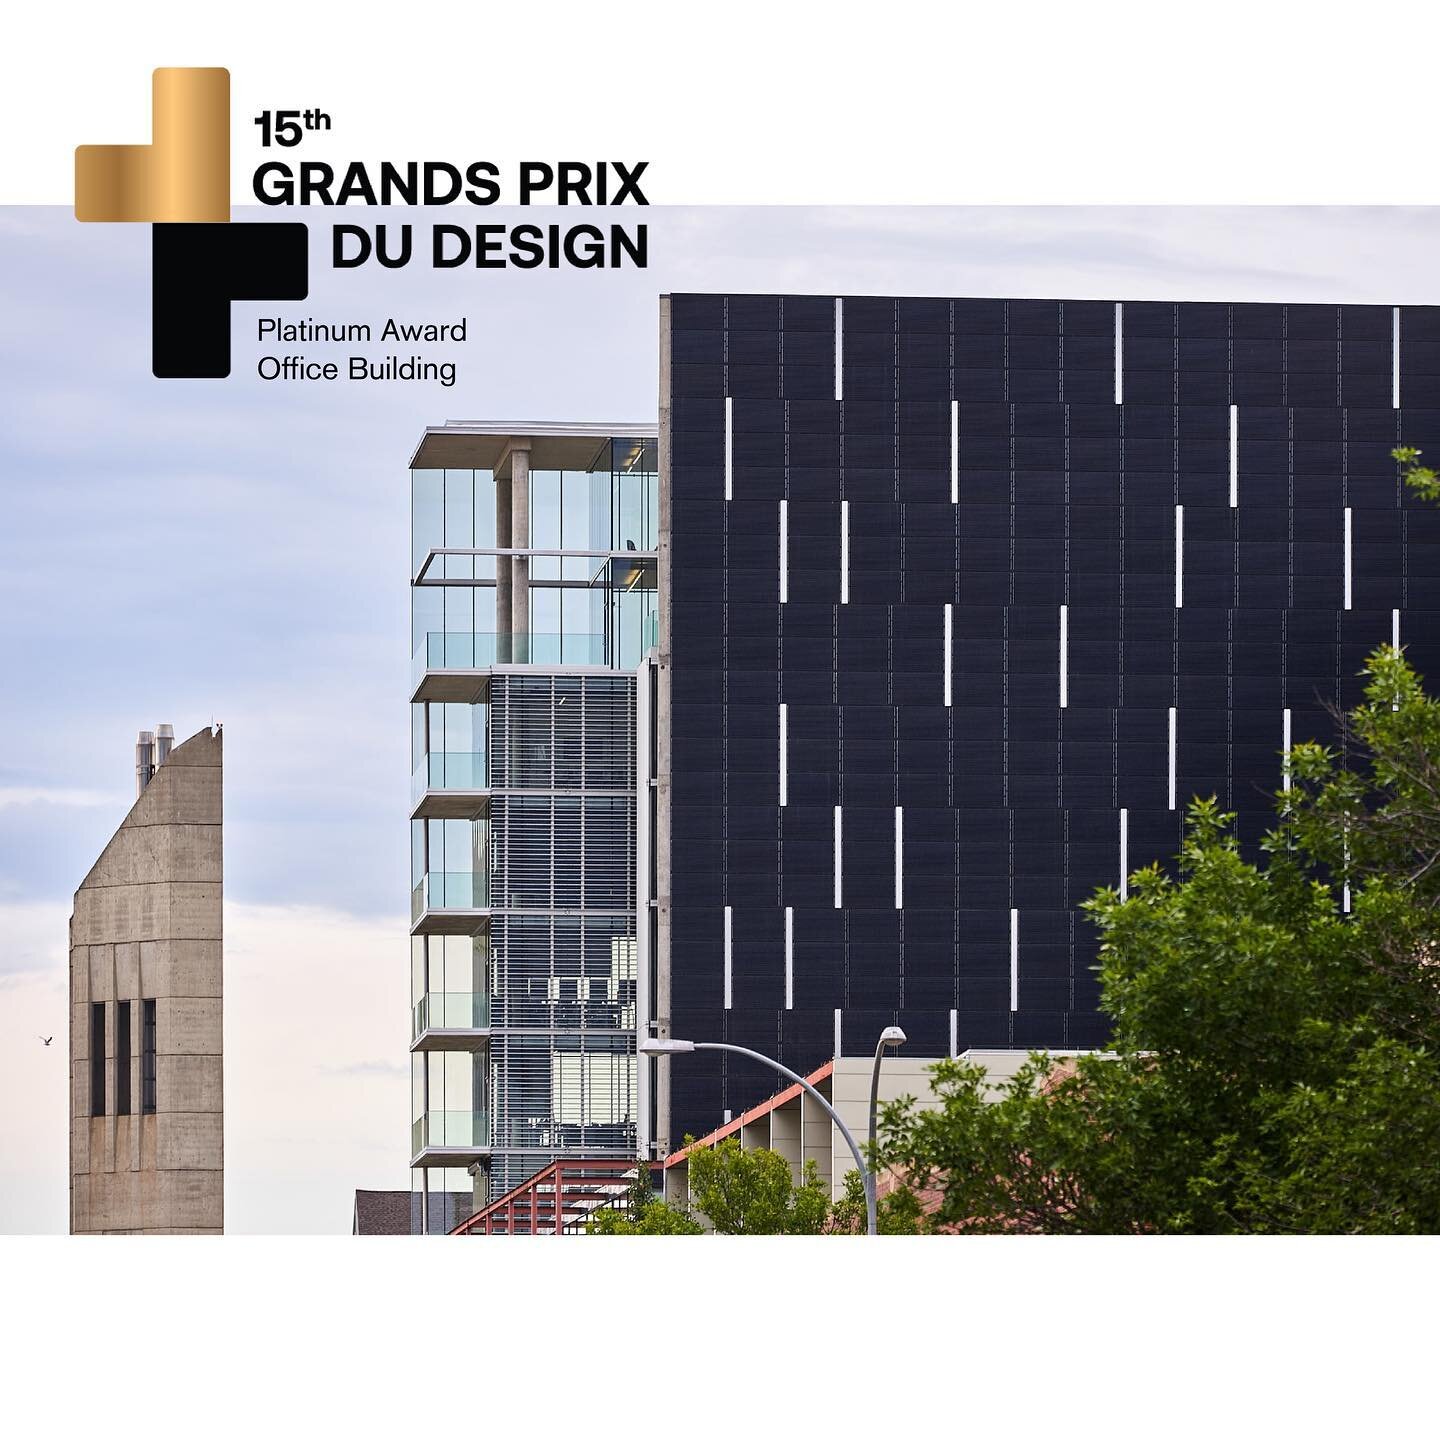 Wrapping up 2021 with a few more awards to share for The Edge building!

&bull;Grands Prix du Design - International Award in Architecture
&bull;Grands Prix du Design - Platinum Award (Office Building)
&bull;Architecture MasterPrize - Winner (Commerc